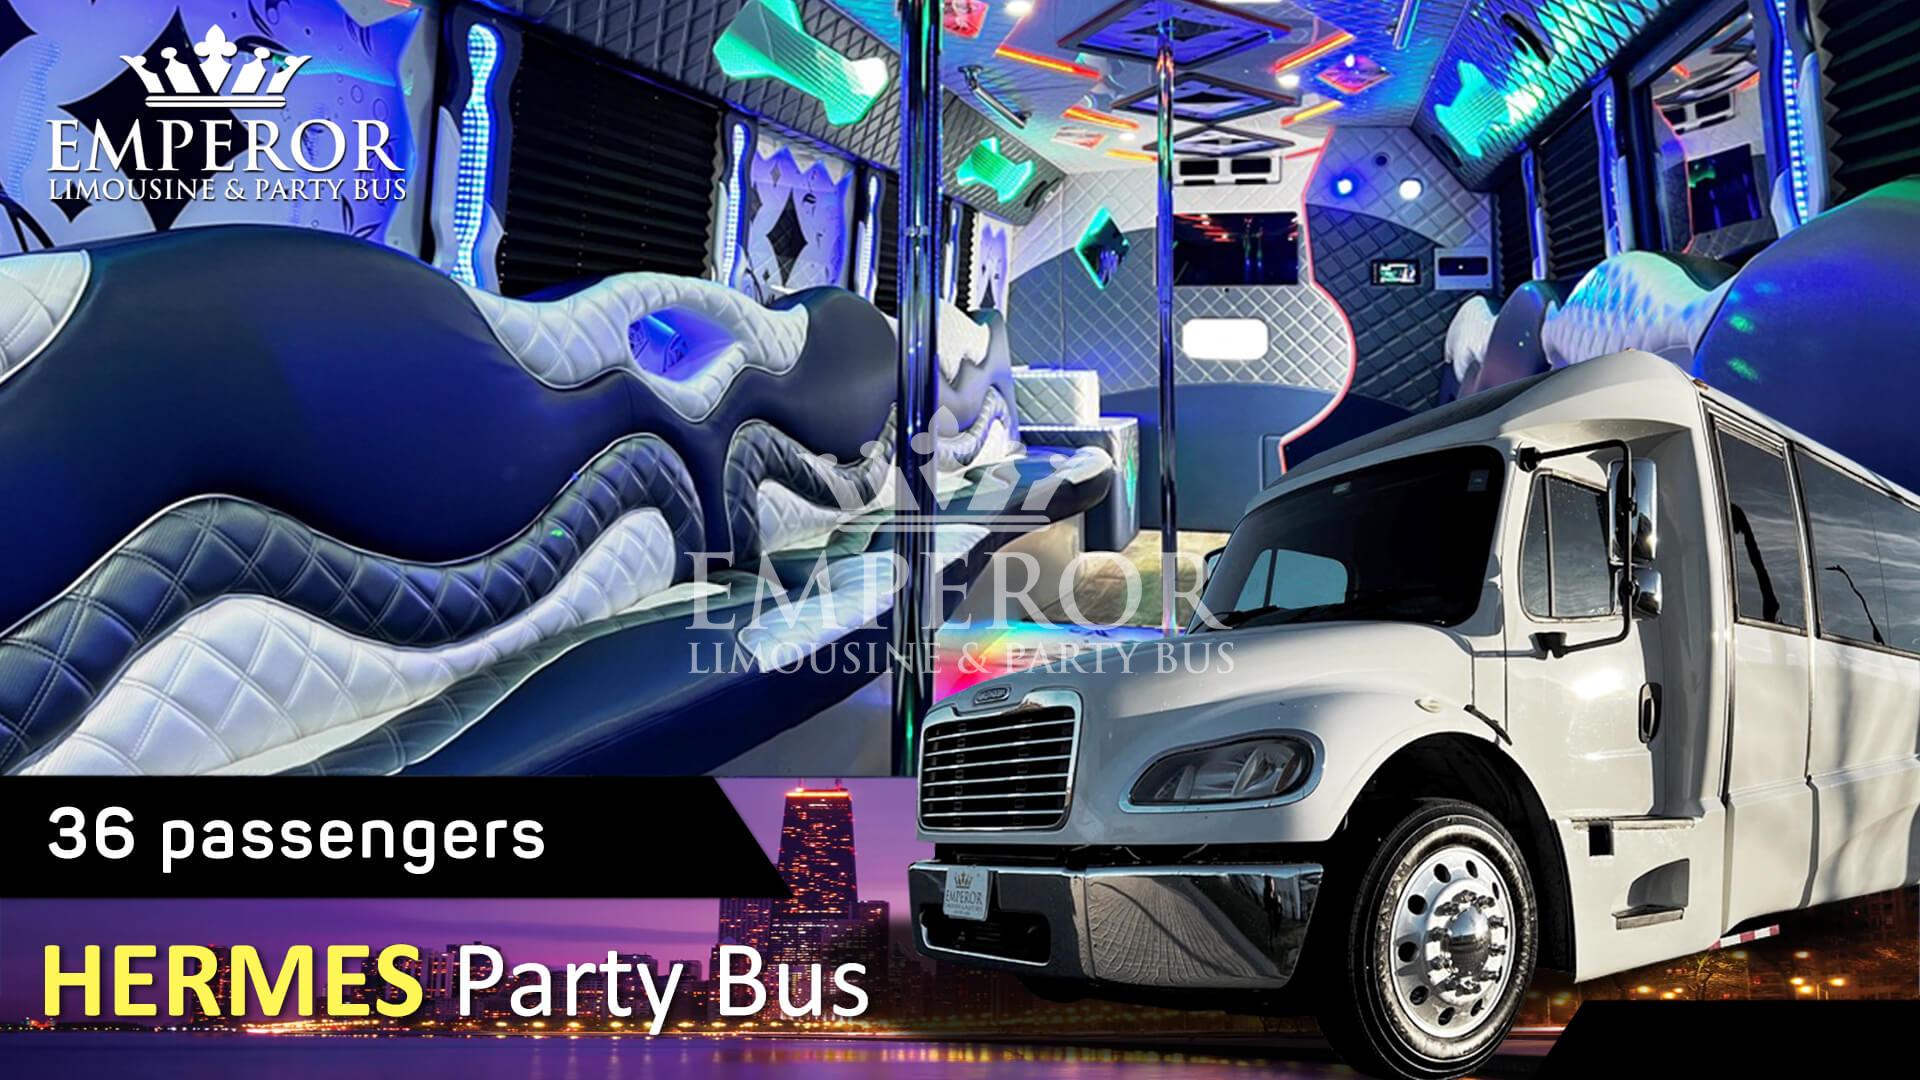 Party bus rental in Bloomingdale, IL - Hermes Edition